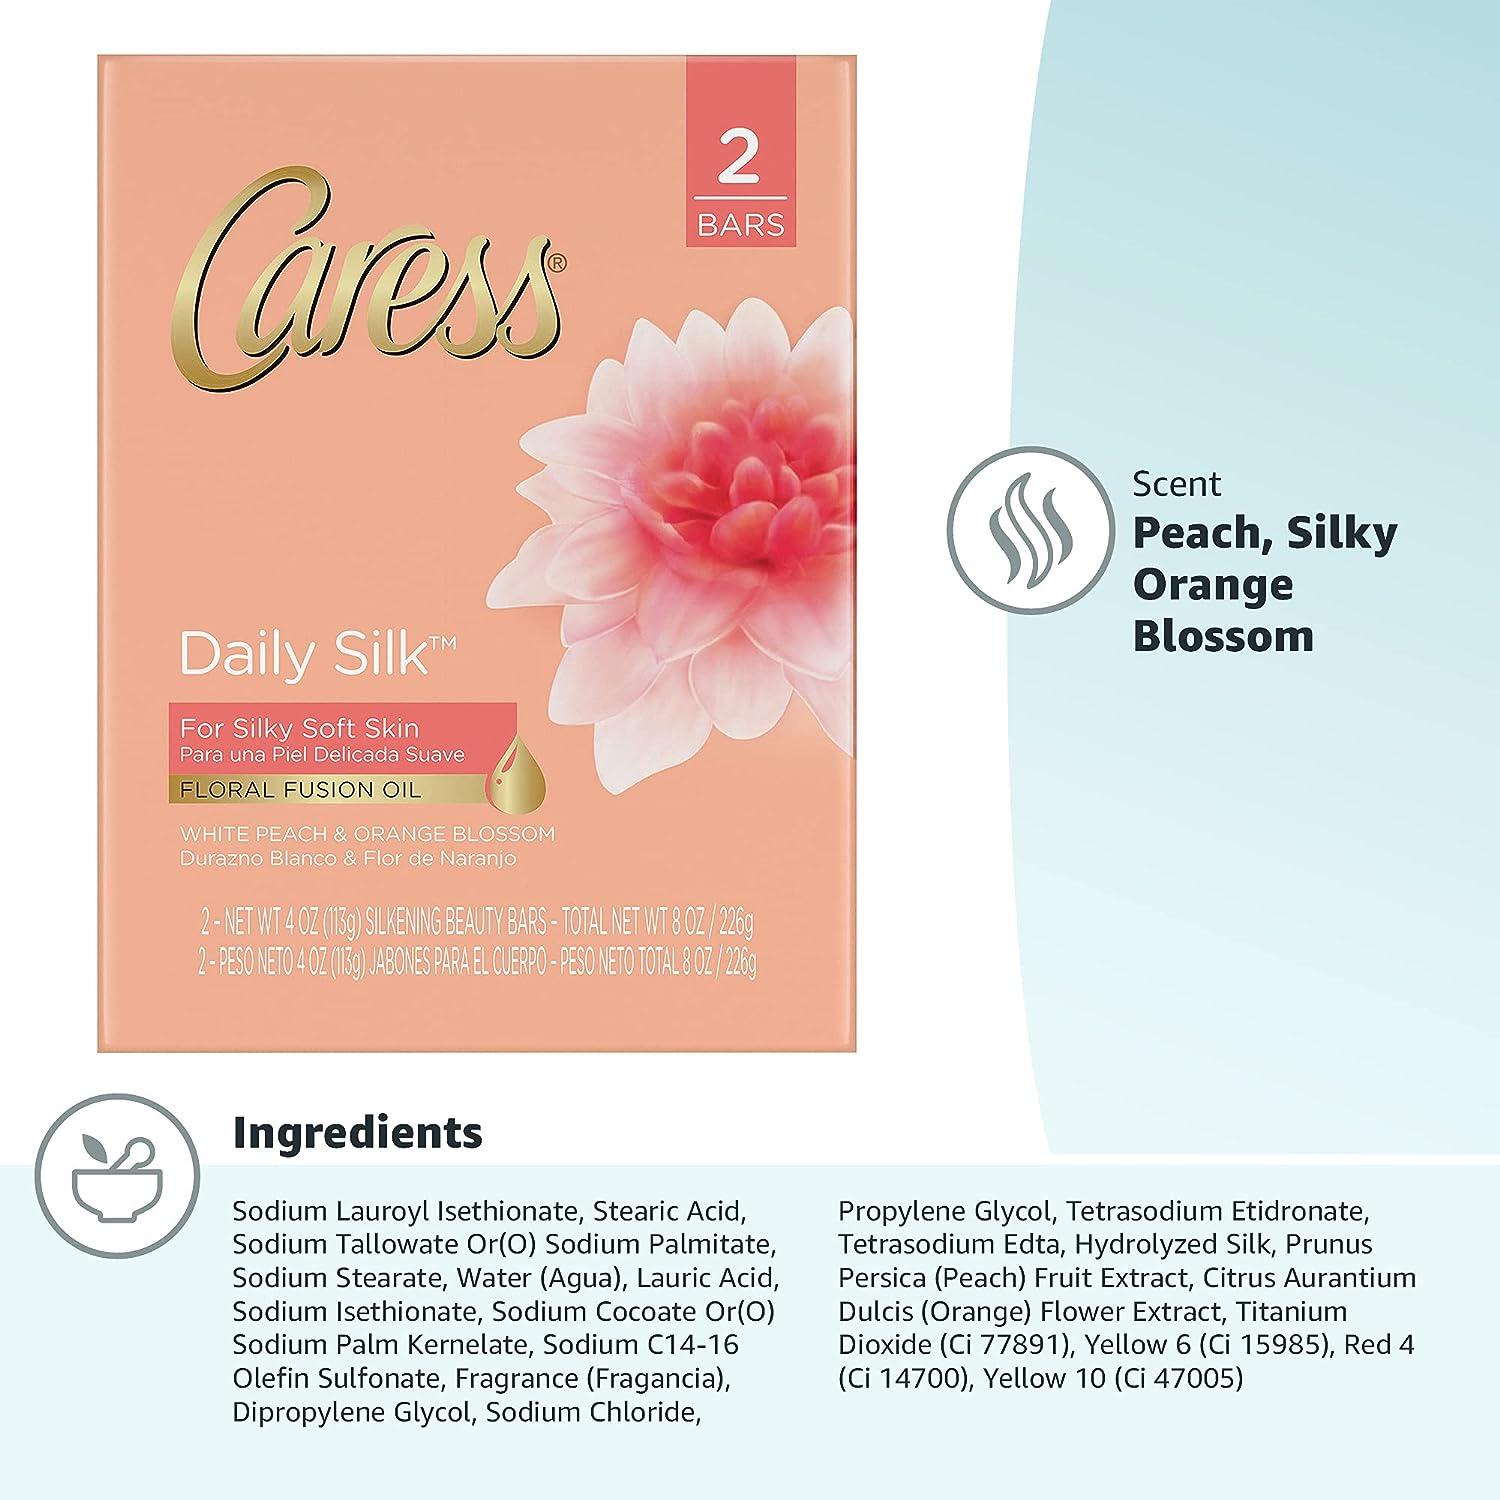 Caress Beauty Bar Soap For Silky Soft Skin Daily Silk With Silk Extract and  Floral Oil Essence 2 x 4 Ounce (Total of 8 ounce)